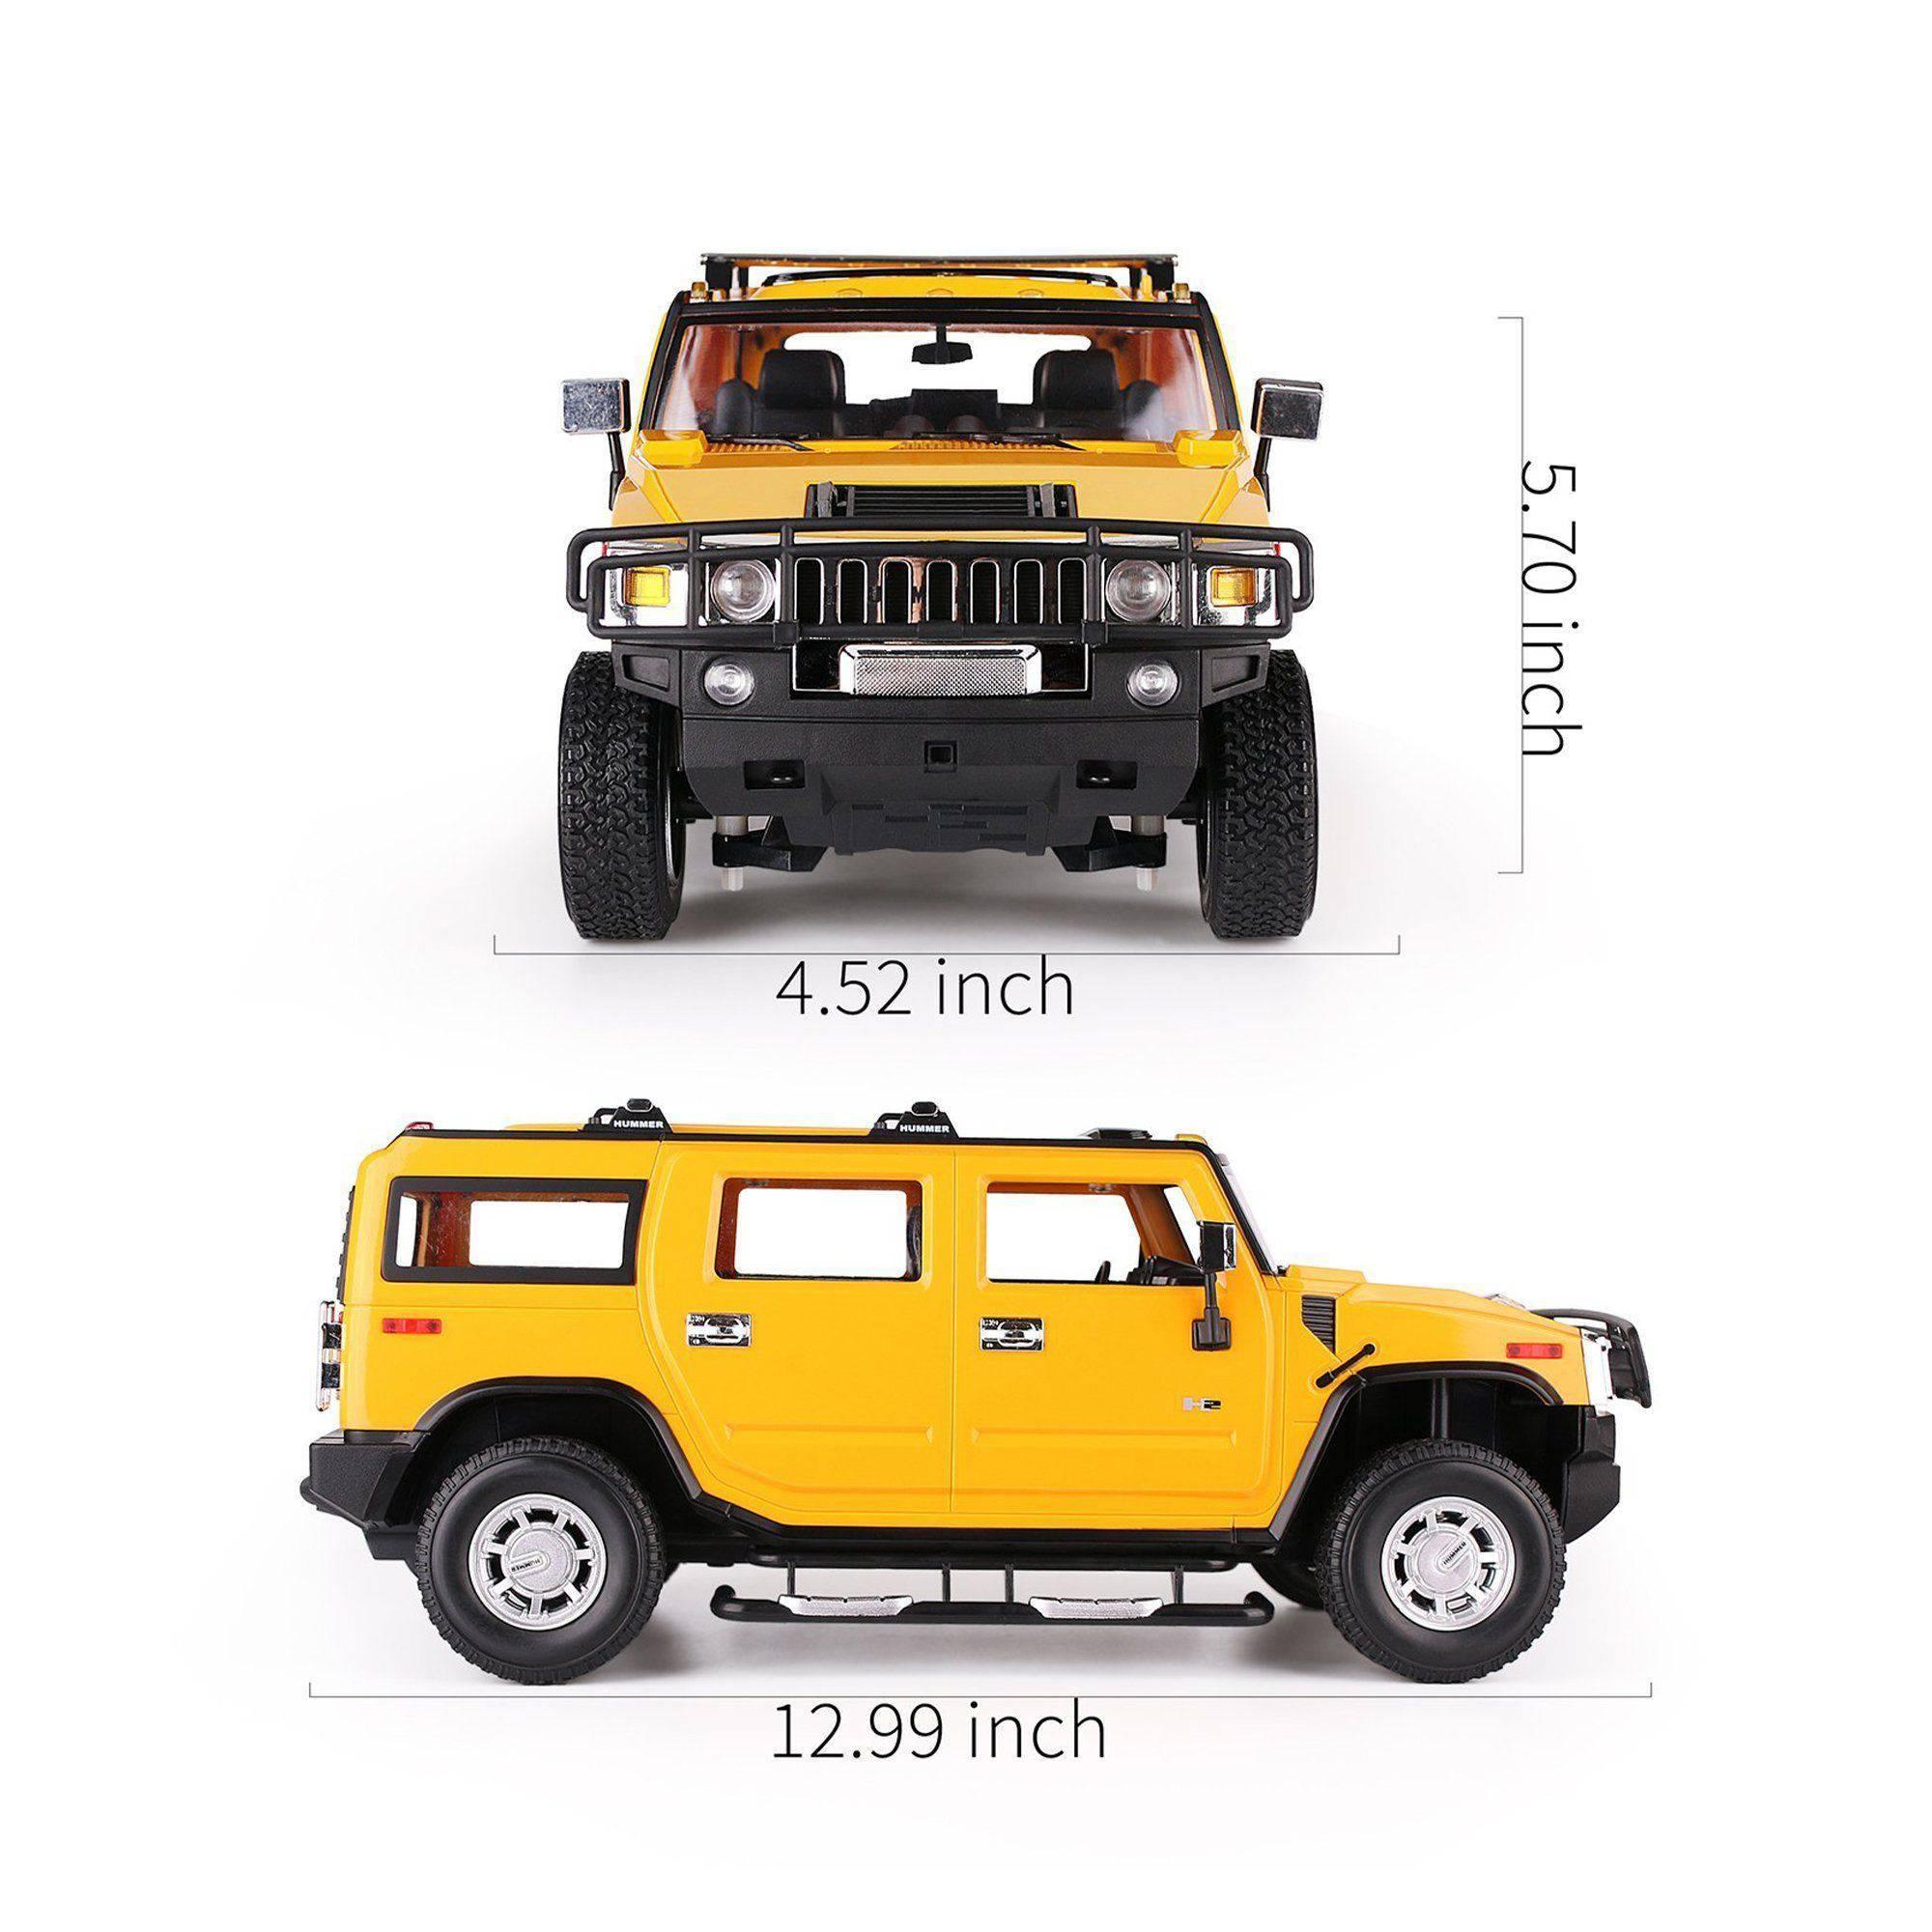 Hummer H2 Remote Controlled Car - American Kids Cars